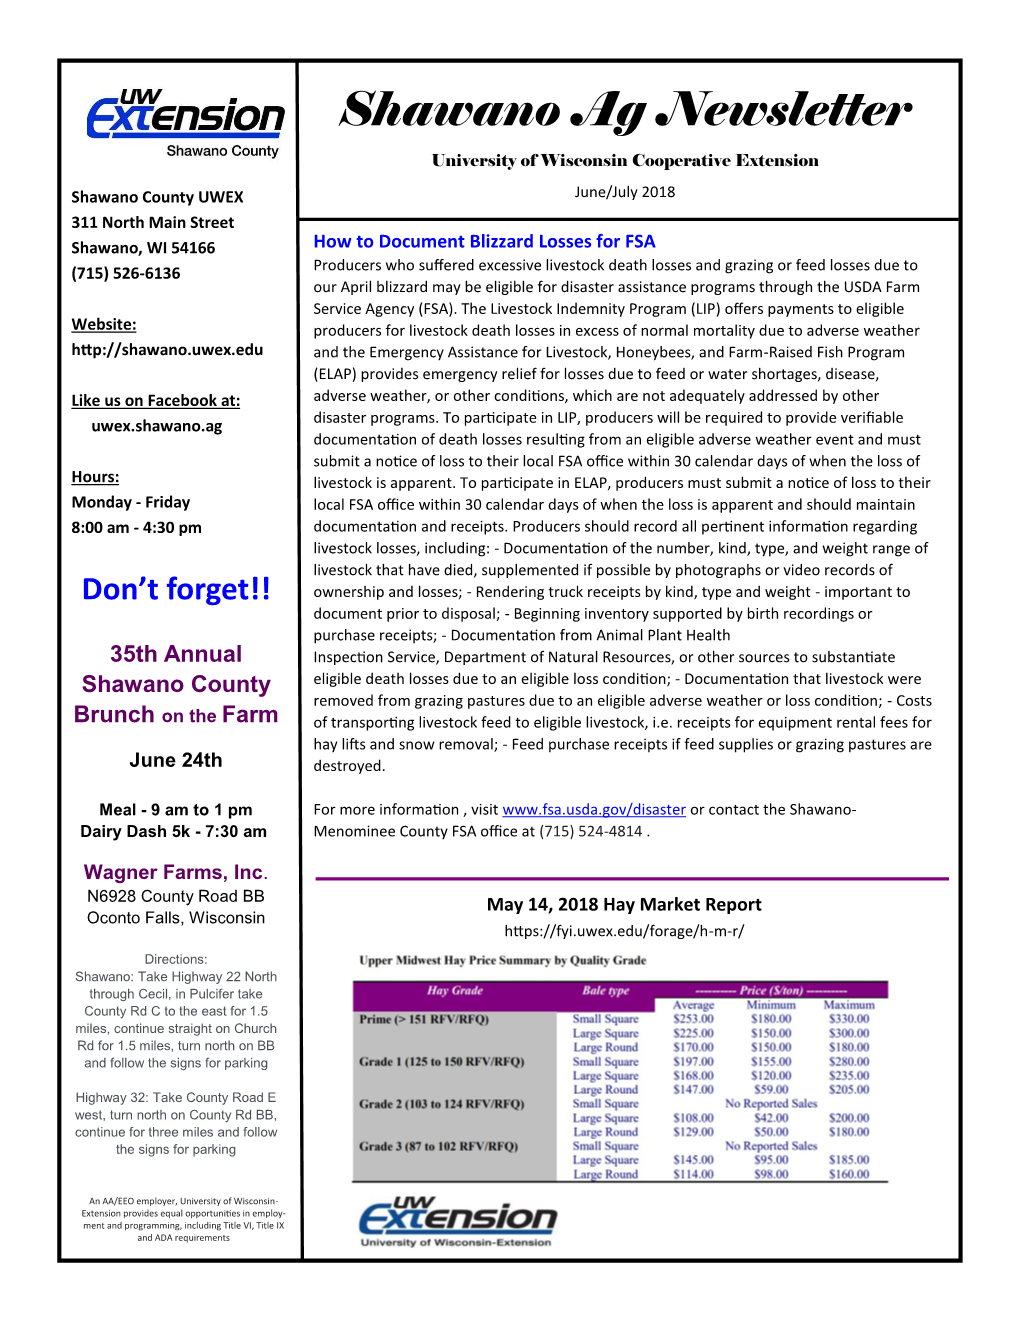 Shawano Ag Newsletter University of Wisconsin Cooperative Extension